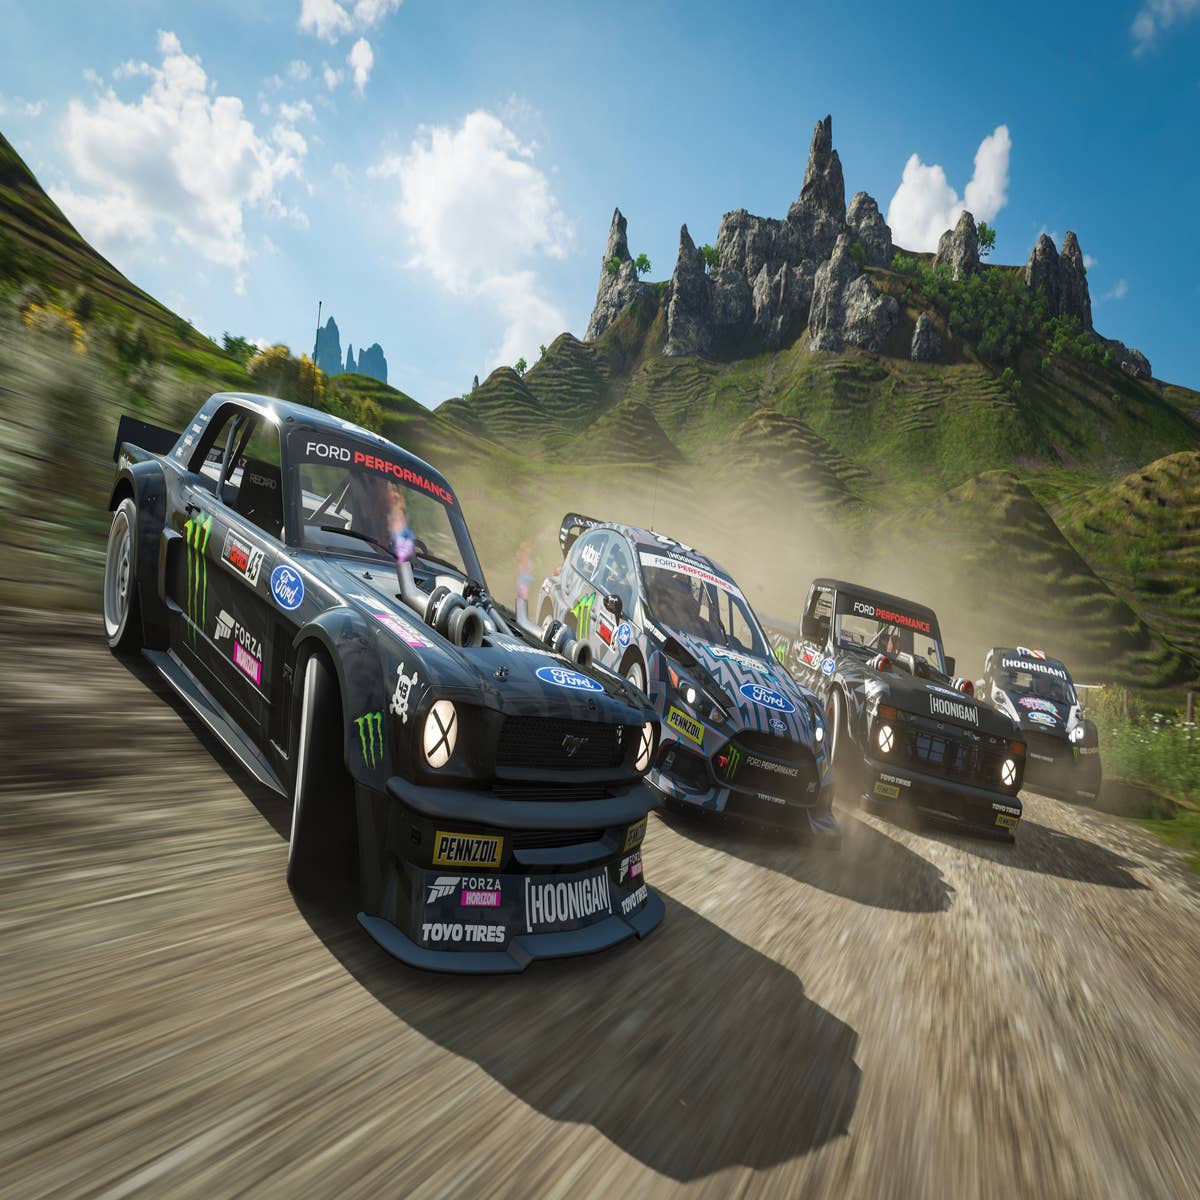 Forza Horizon 5 Devs Currently Working On A 'Premium Open World' Game